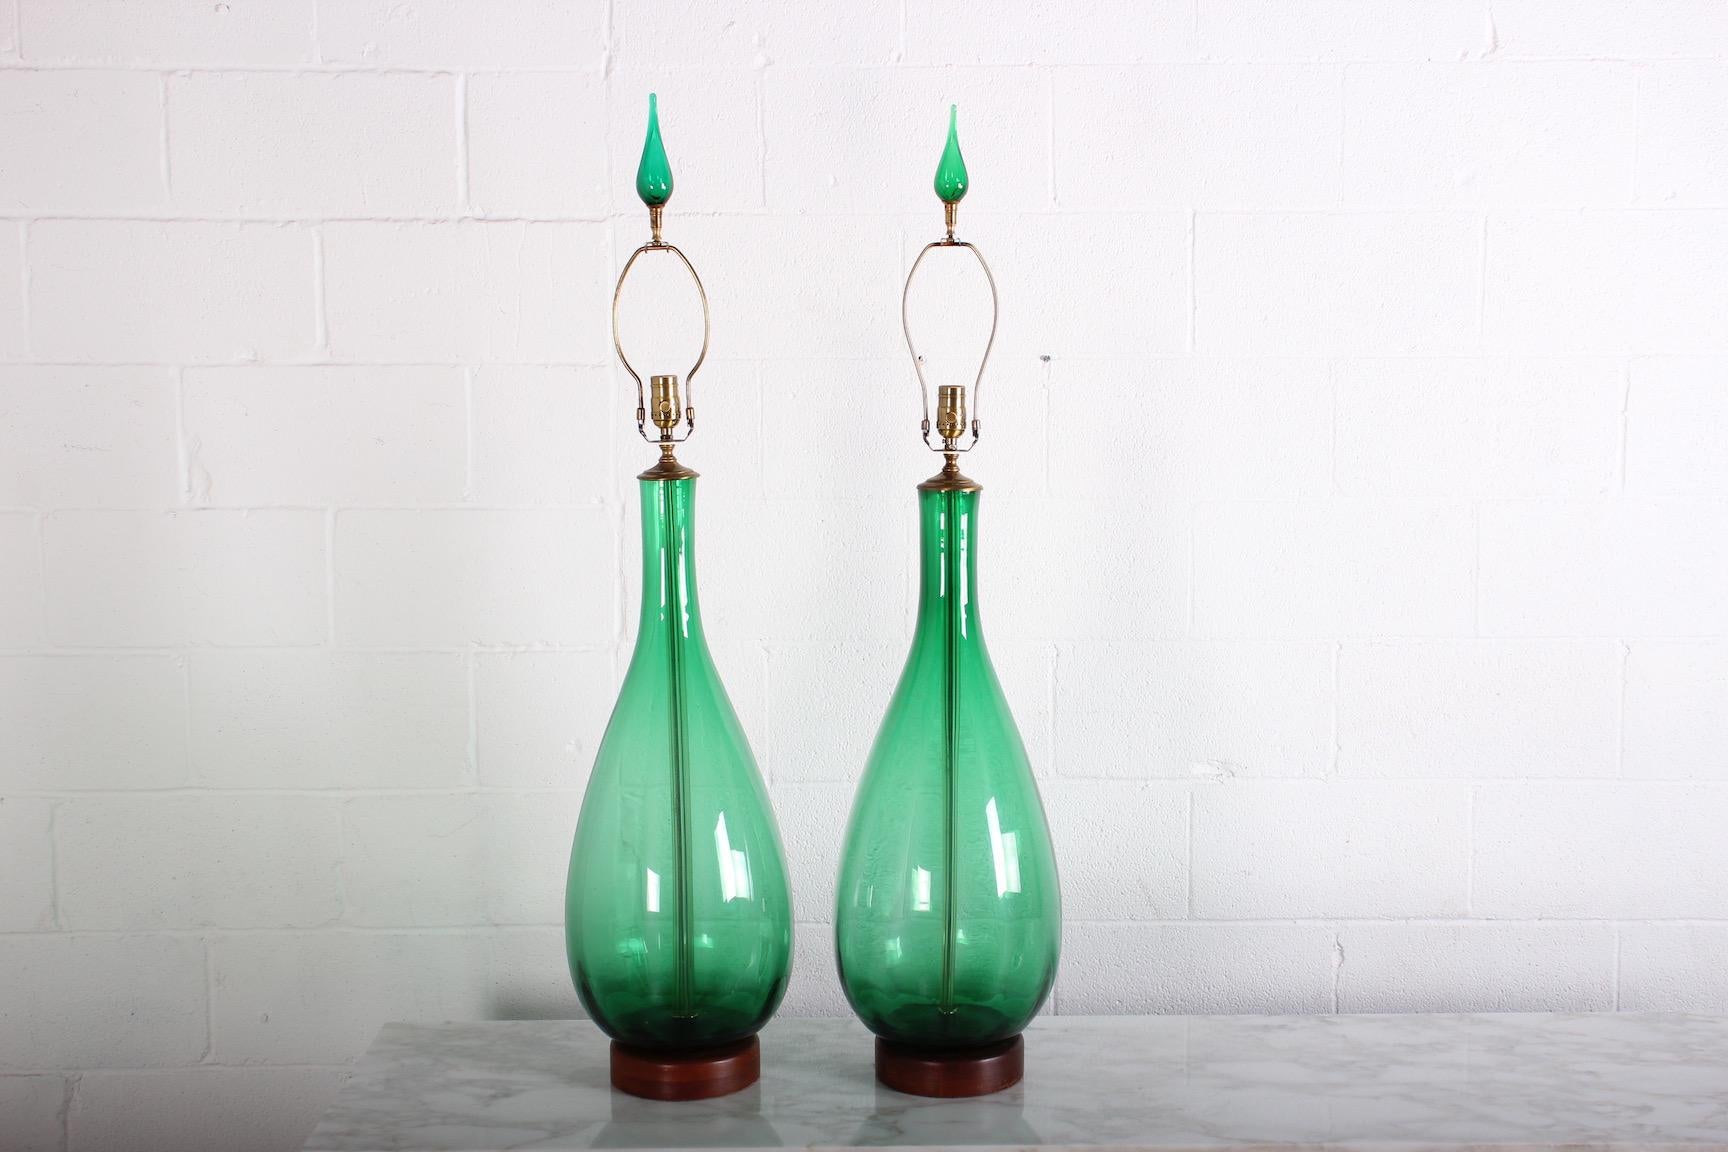 A large scale pair of green glass lamps with matching finials by Blenko.